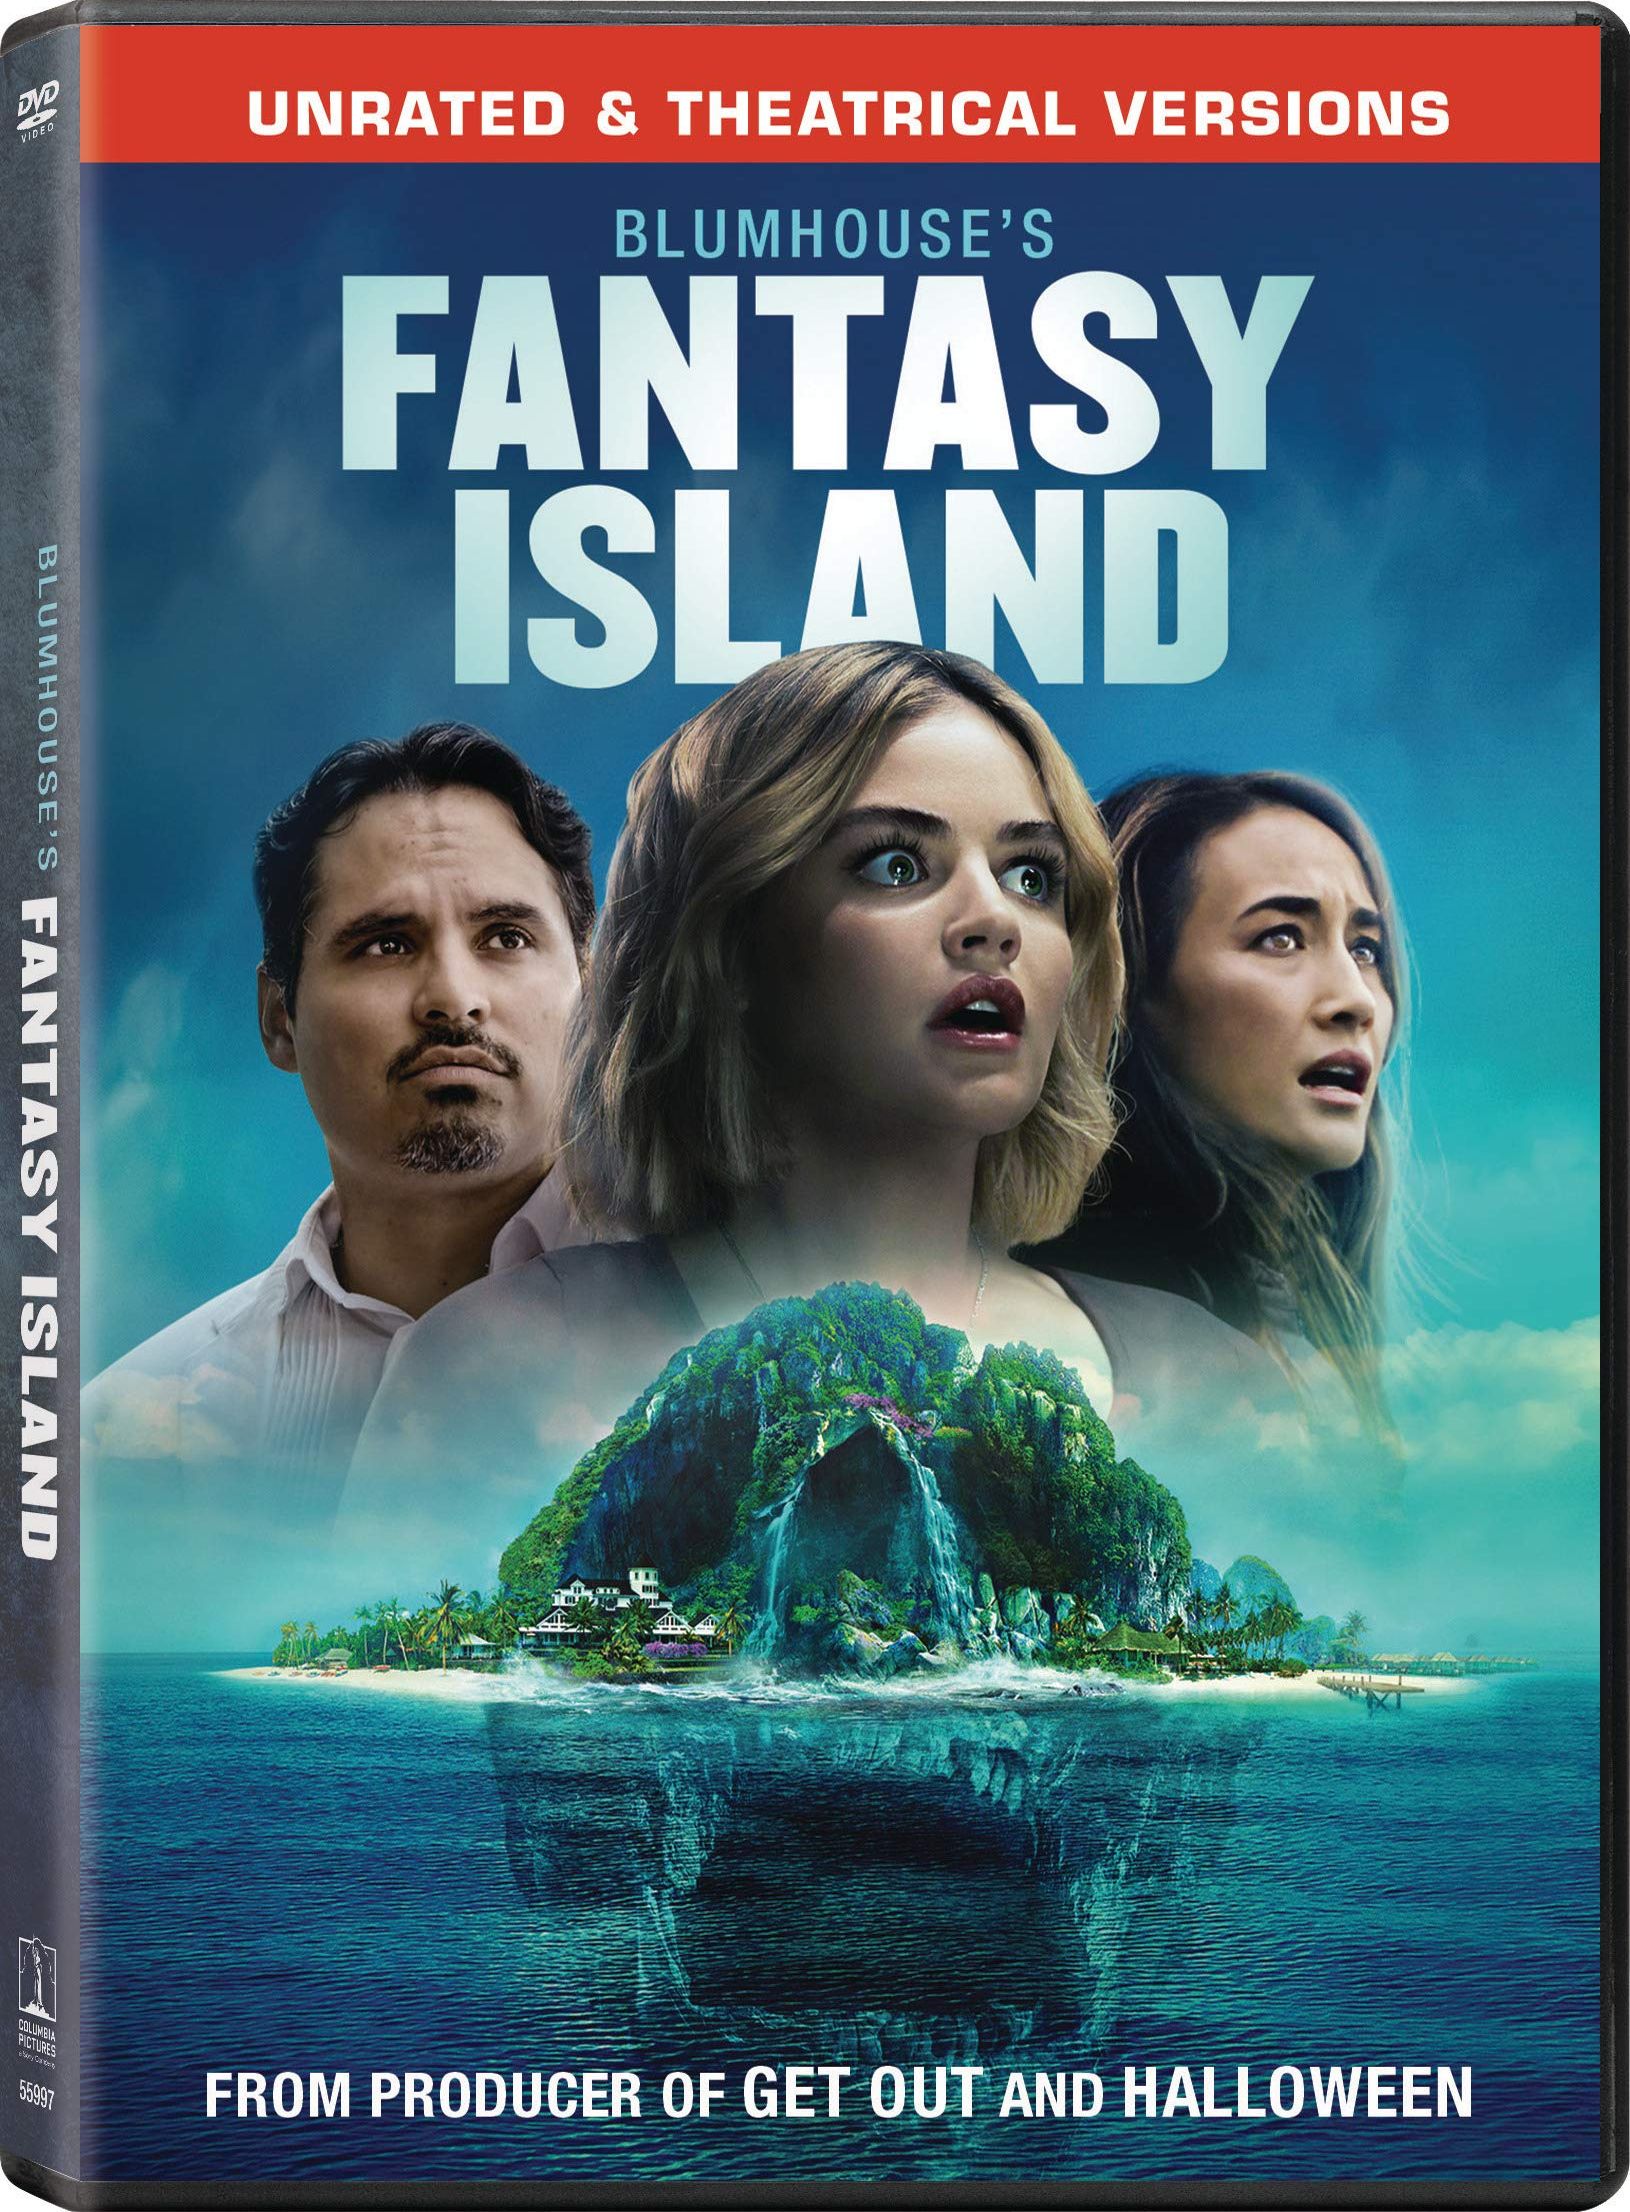 Fantasy Island Dvd Release Date May 12, 2020